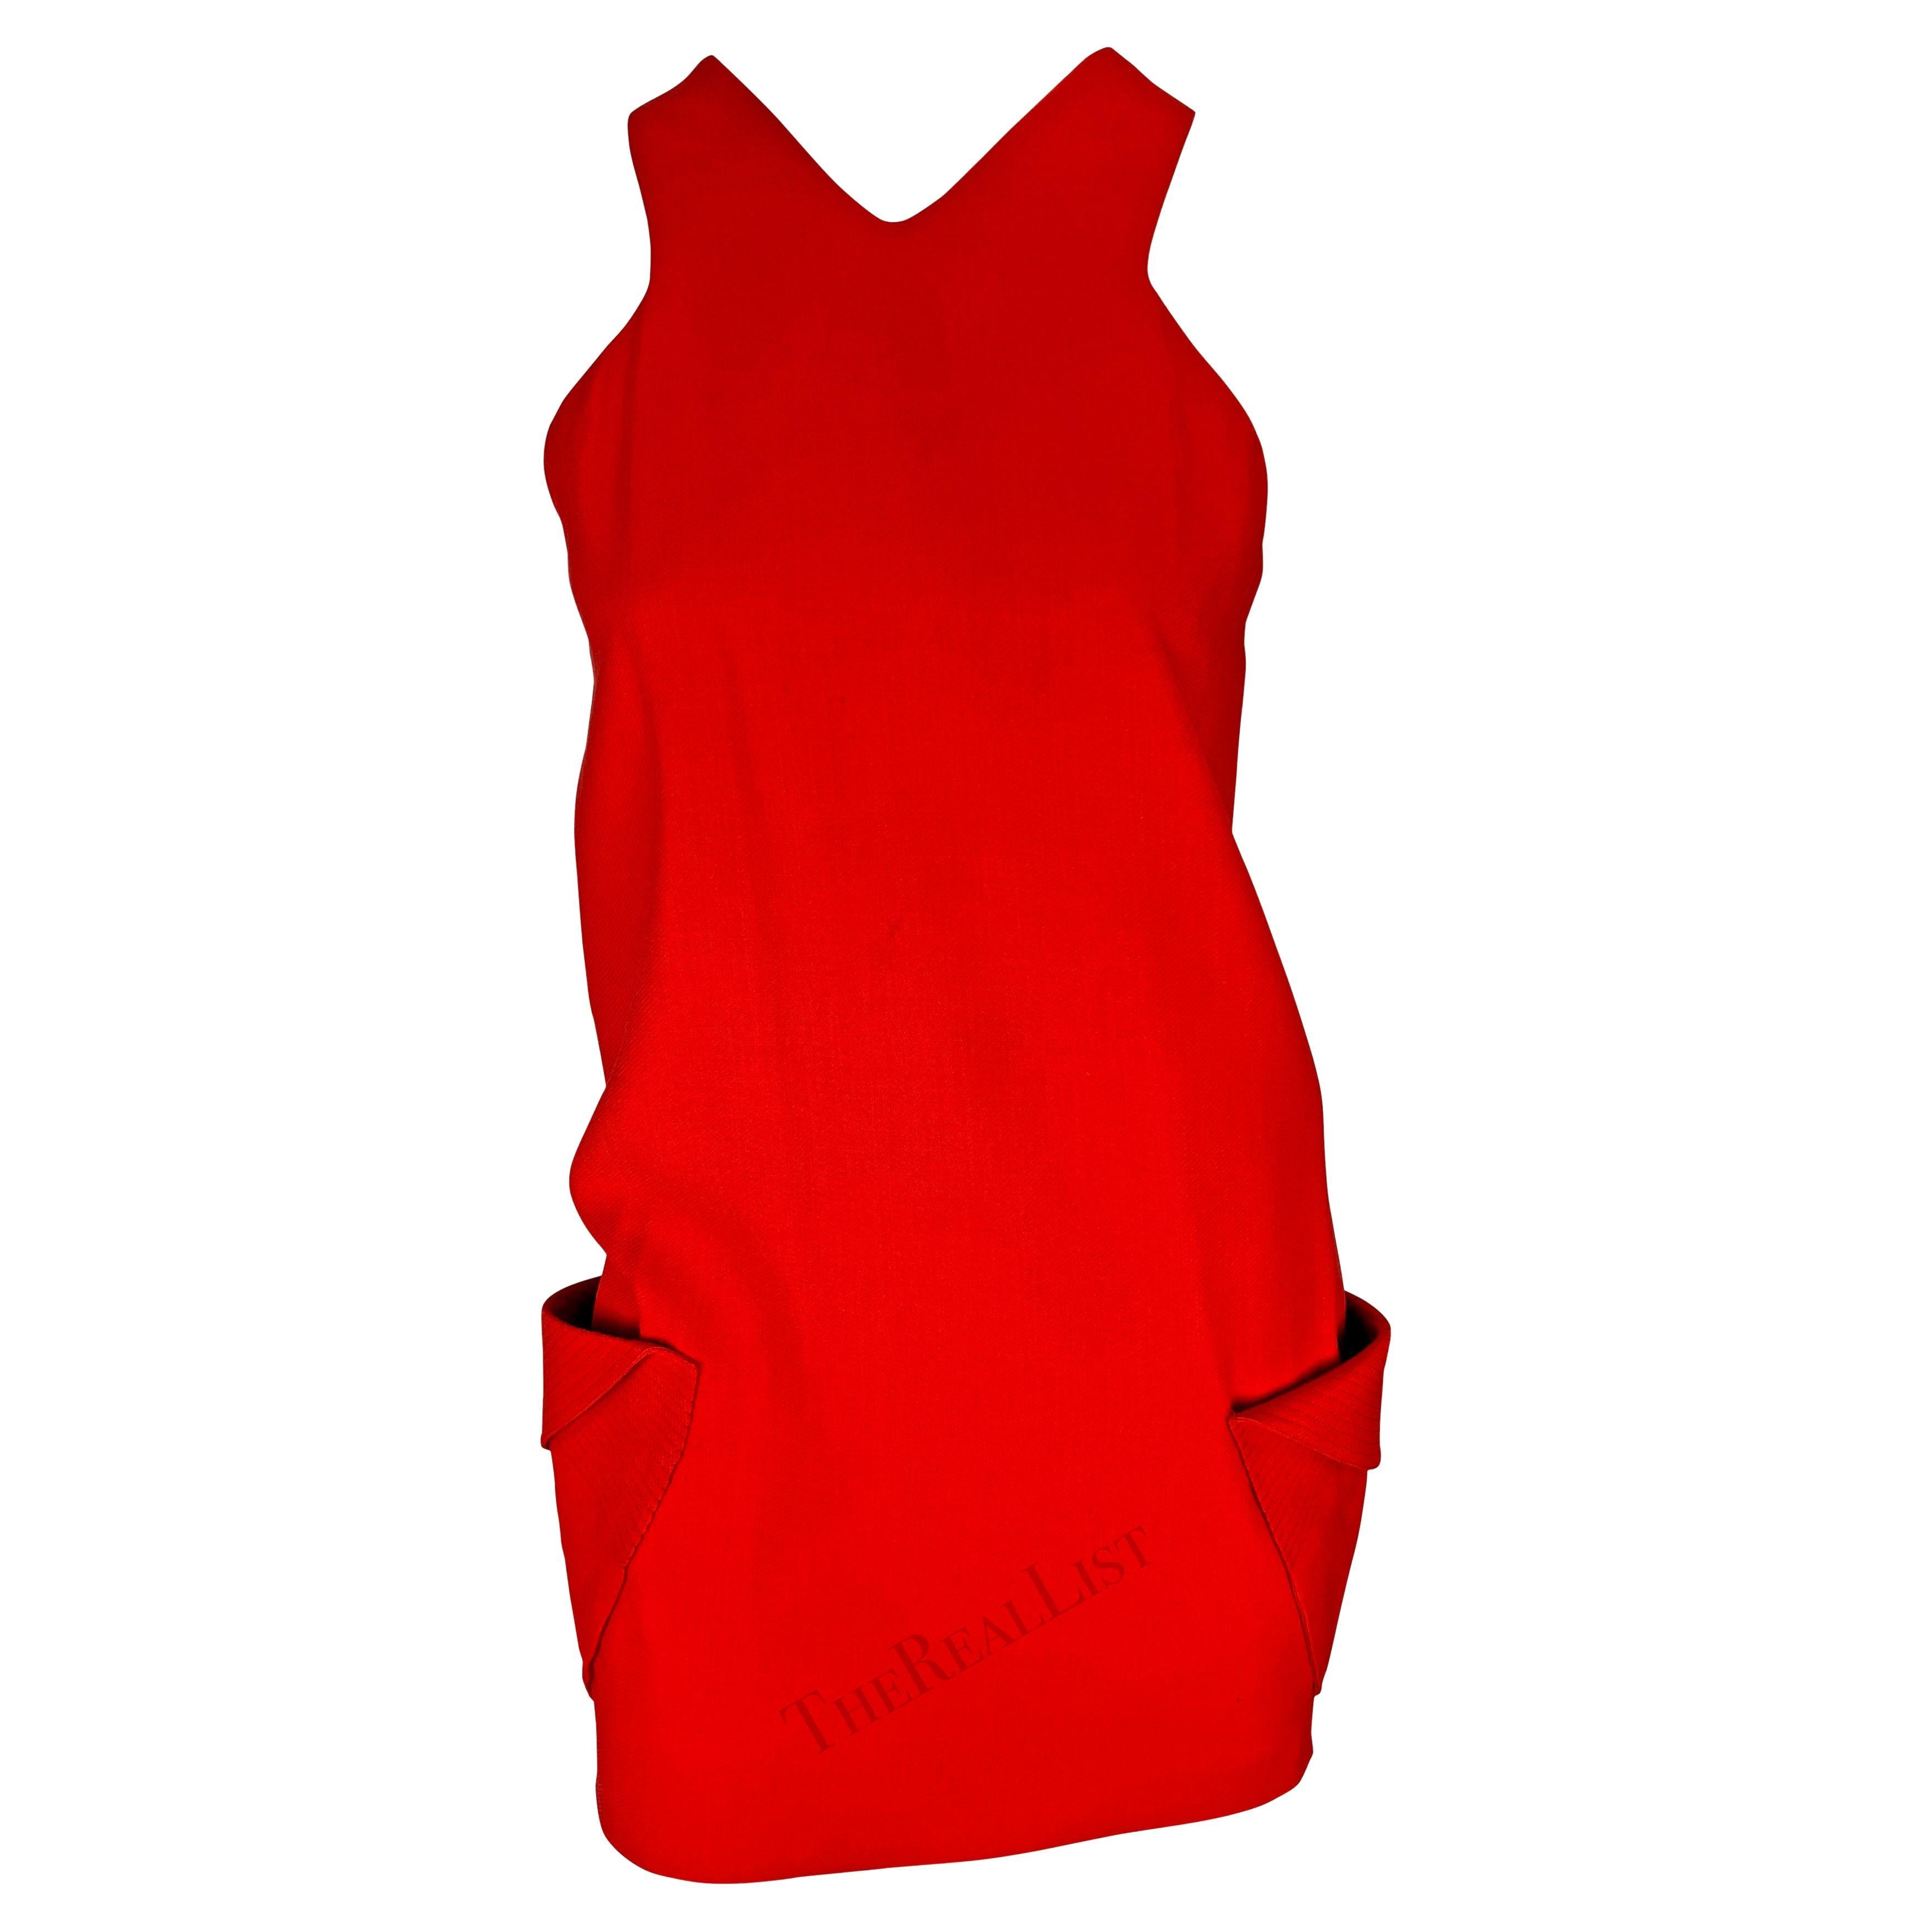 S/S 1991 Gianni Versace Runway Ad Red Sleeveless Pocket Mini Shift Dress For Sale